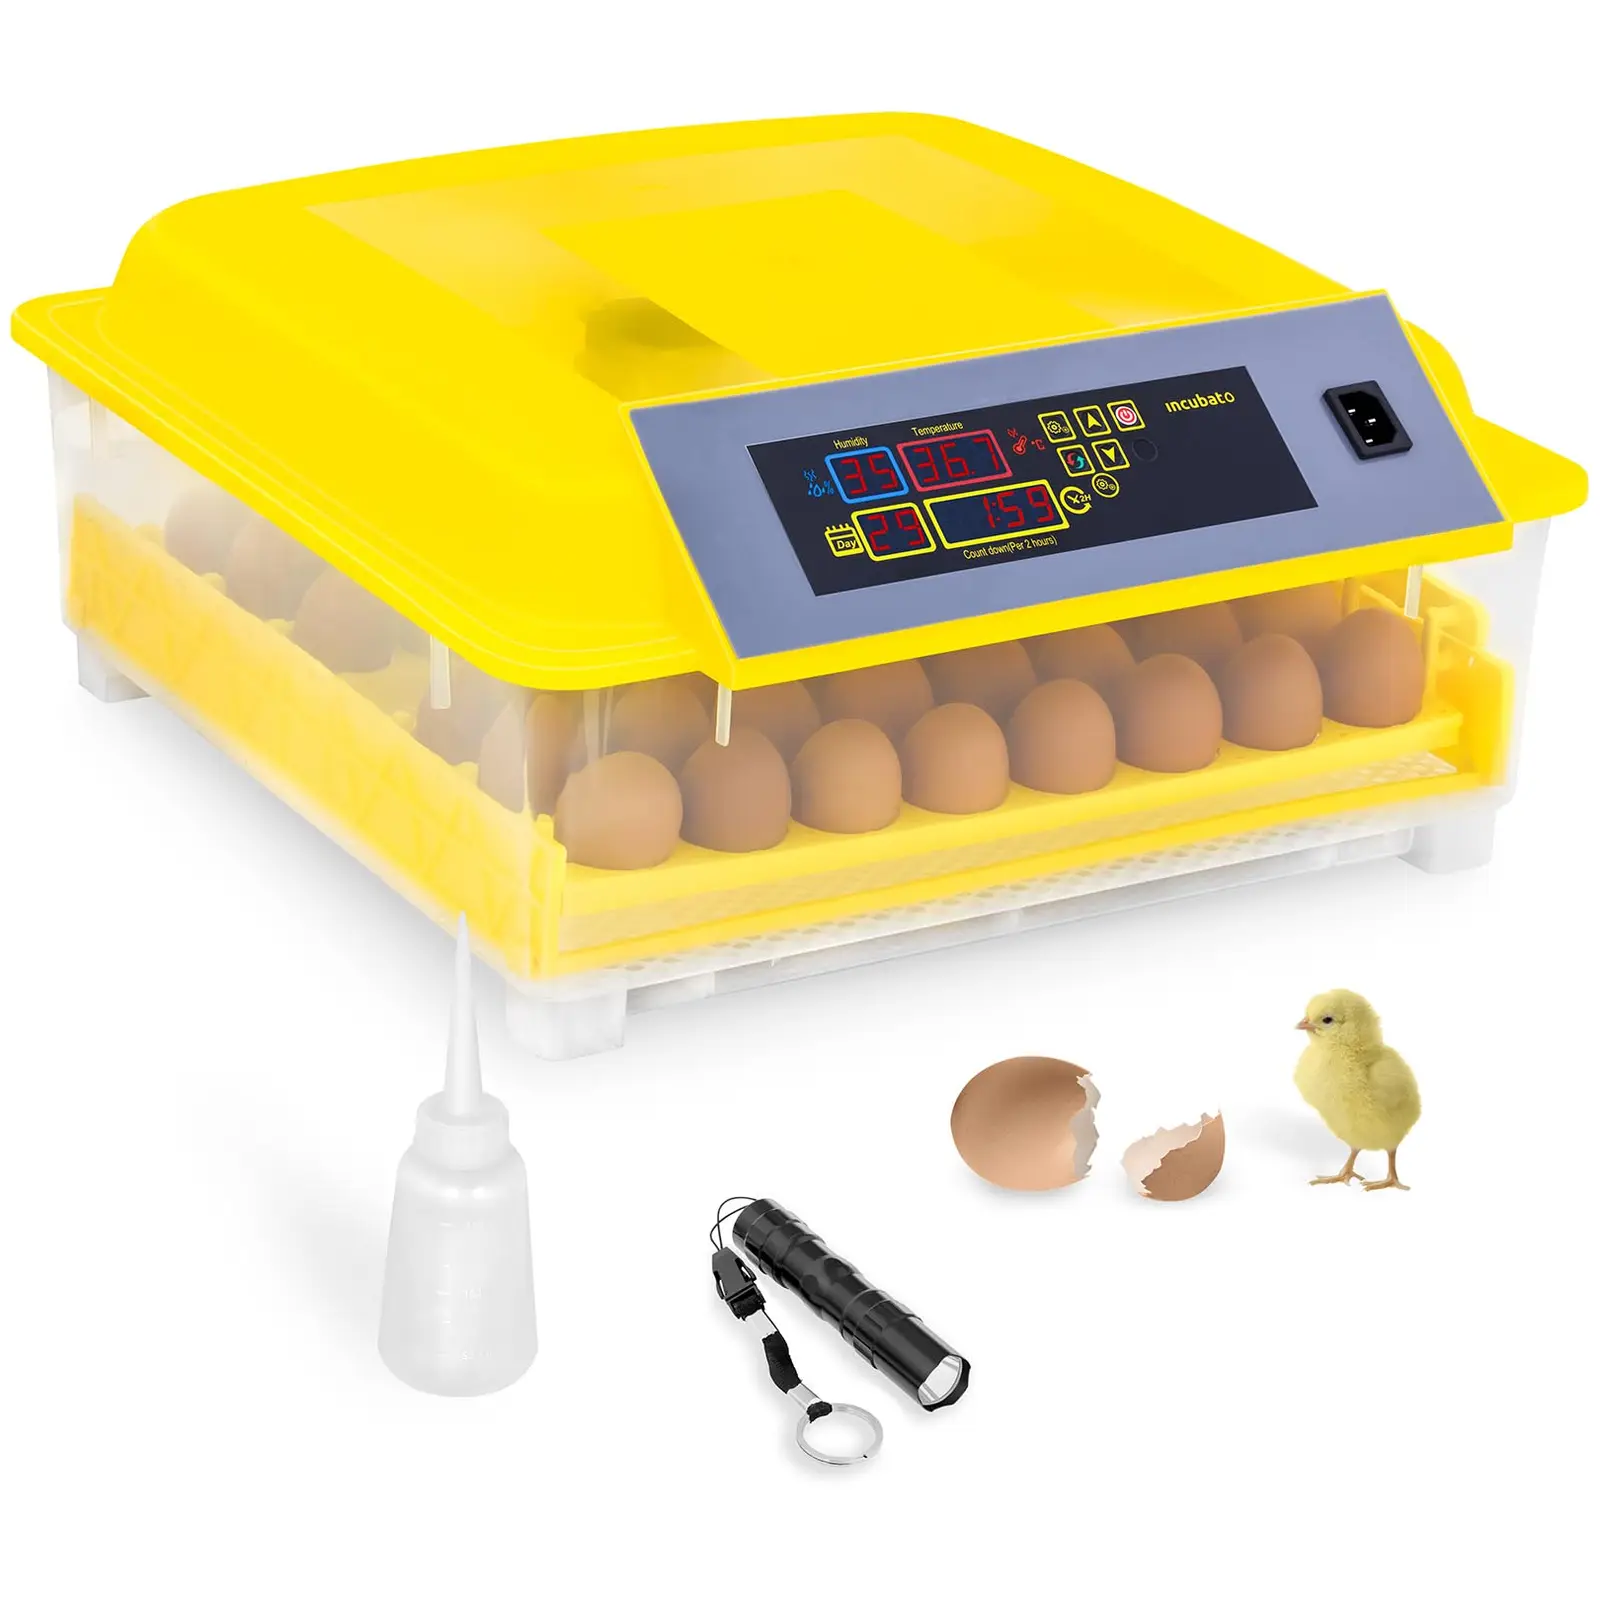 Factory second Egg Incubator - 48 Eggs - Incl. Egg Candler and Water Dispenser - Fully Automatic